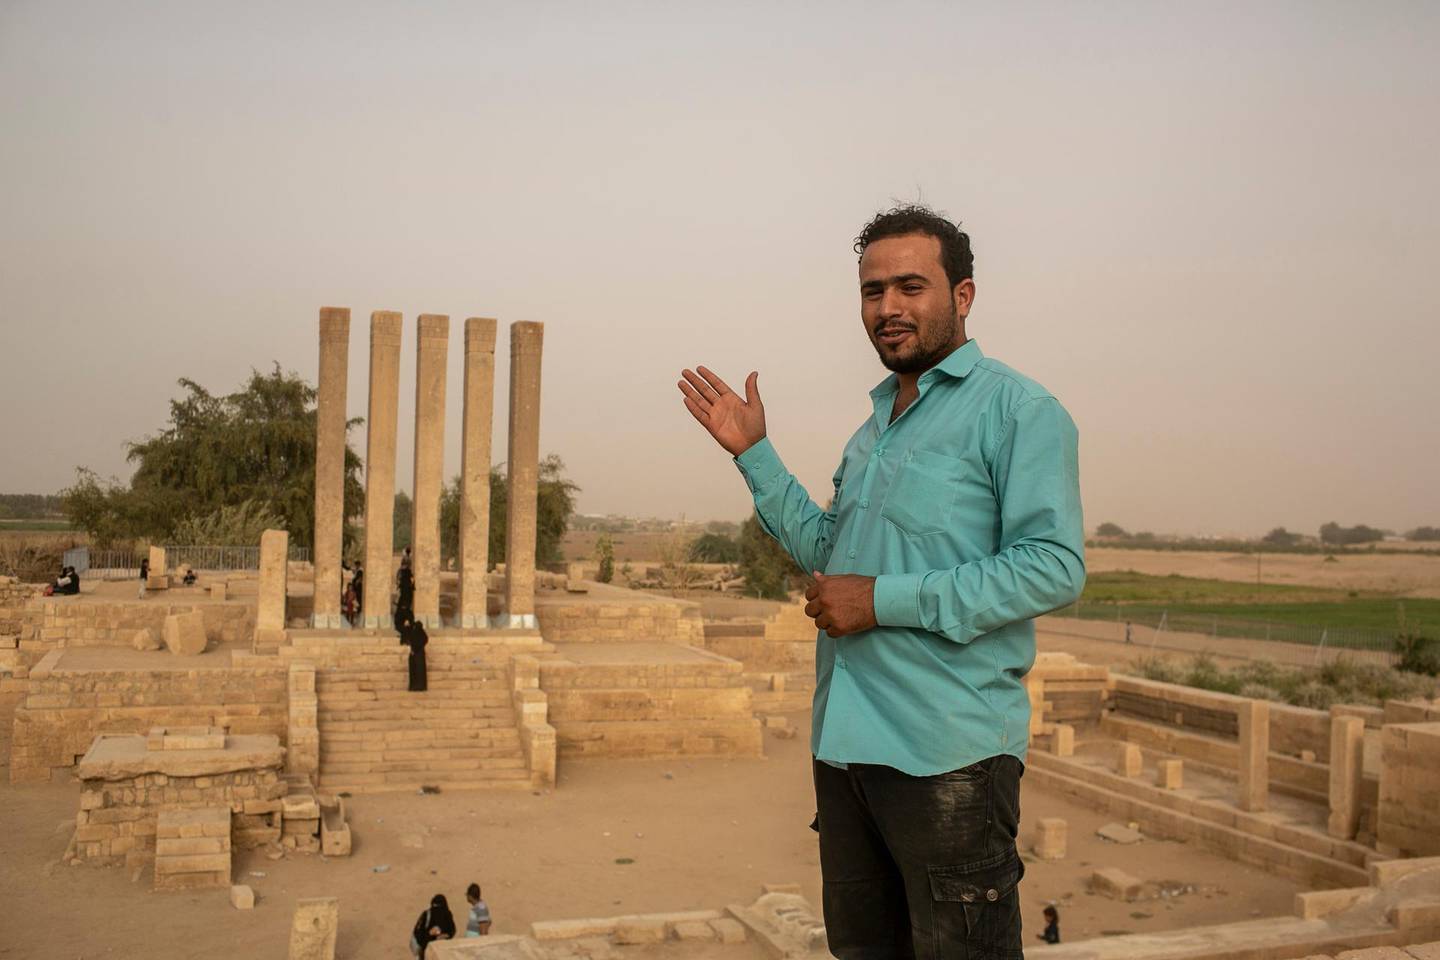 Rashad, 23, in blue shirt, takes a break as he drove visitors to the site of the Queen of Sheba's throne, a temple in Marib, April 4, 2021. Photo/Asmaa Waguih